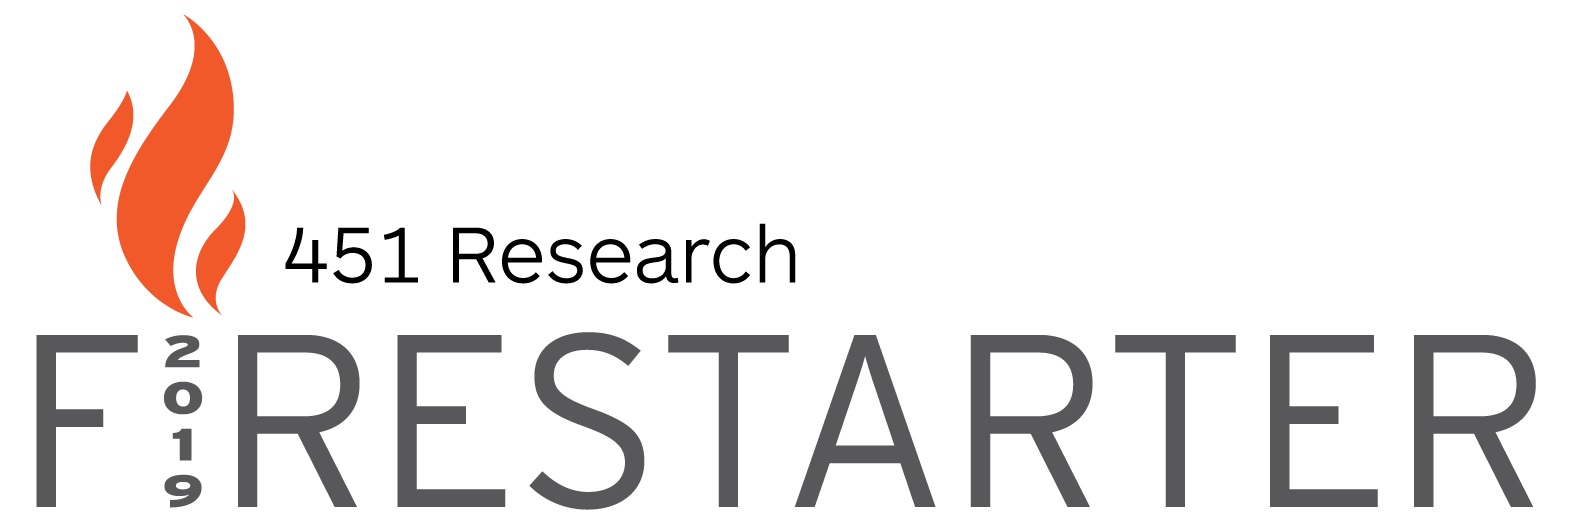 Picture of 2019 451 Research Firestarter Award